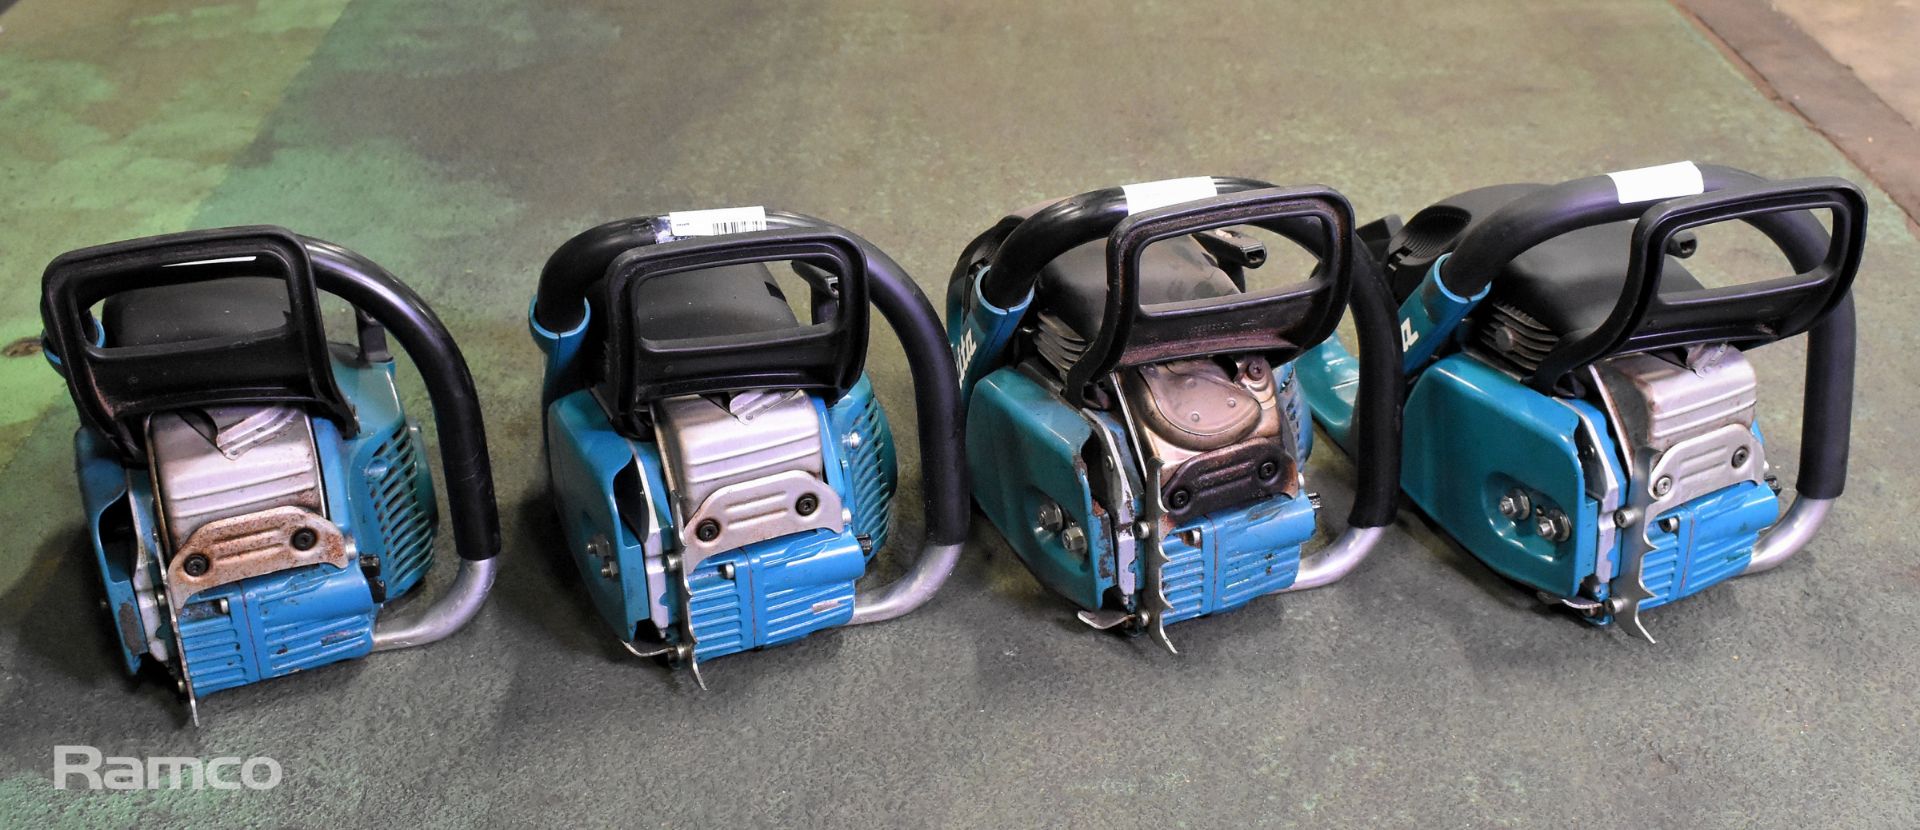 3x Makita DCS5030 50cc petrol chainsaw - BODIES ONLY - AS SPARES AND REPAIRS, 1x Makita EA5000P - Image 2 of 22